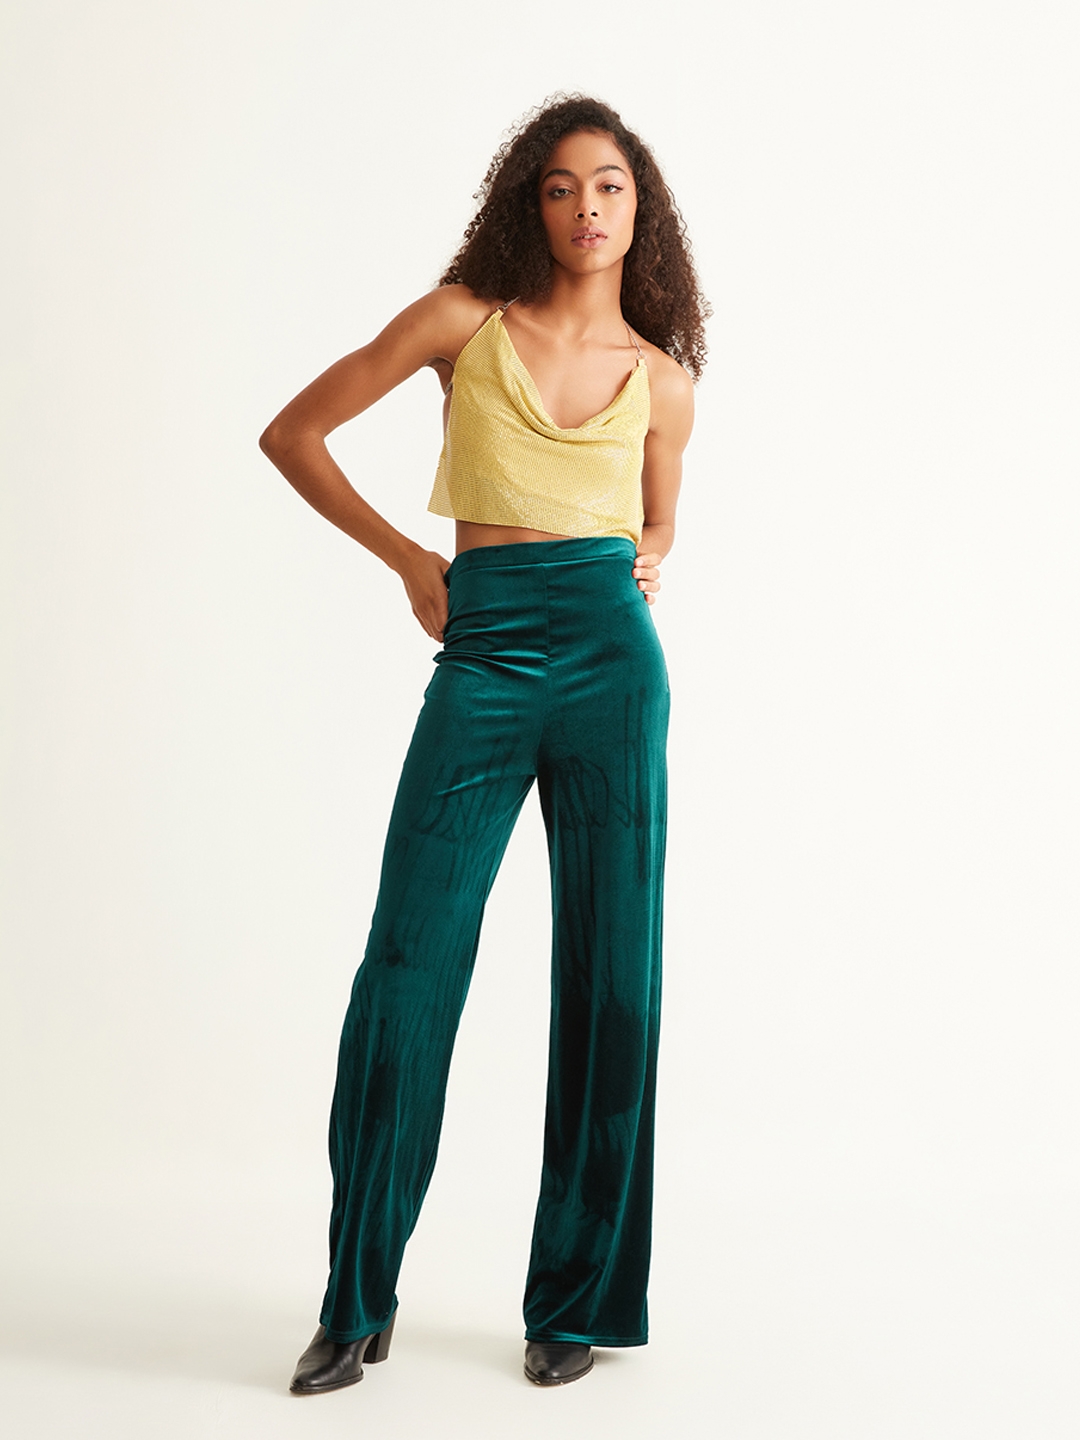 MIXT by Nykaa Fashion Blue High Waisted Shimmer Flared Pants Buy MIXT by  Nykaa Fashion Blue High Waisted Shimmer Flared Pants Online at Best Price  in India  Nykaa